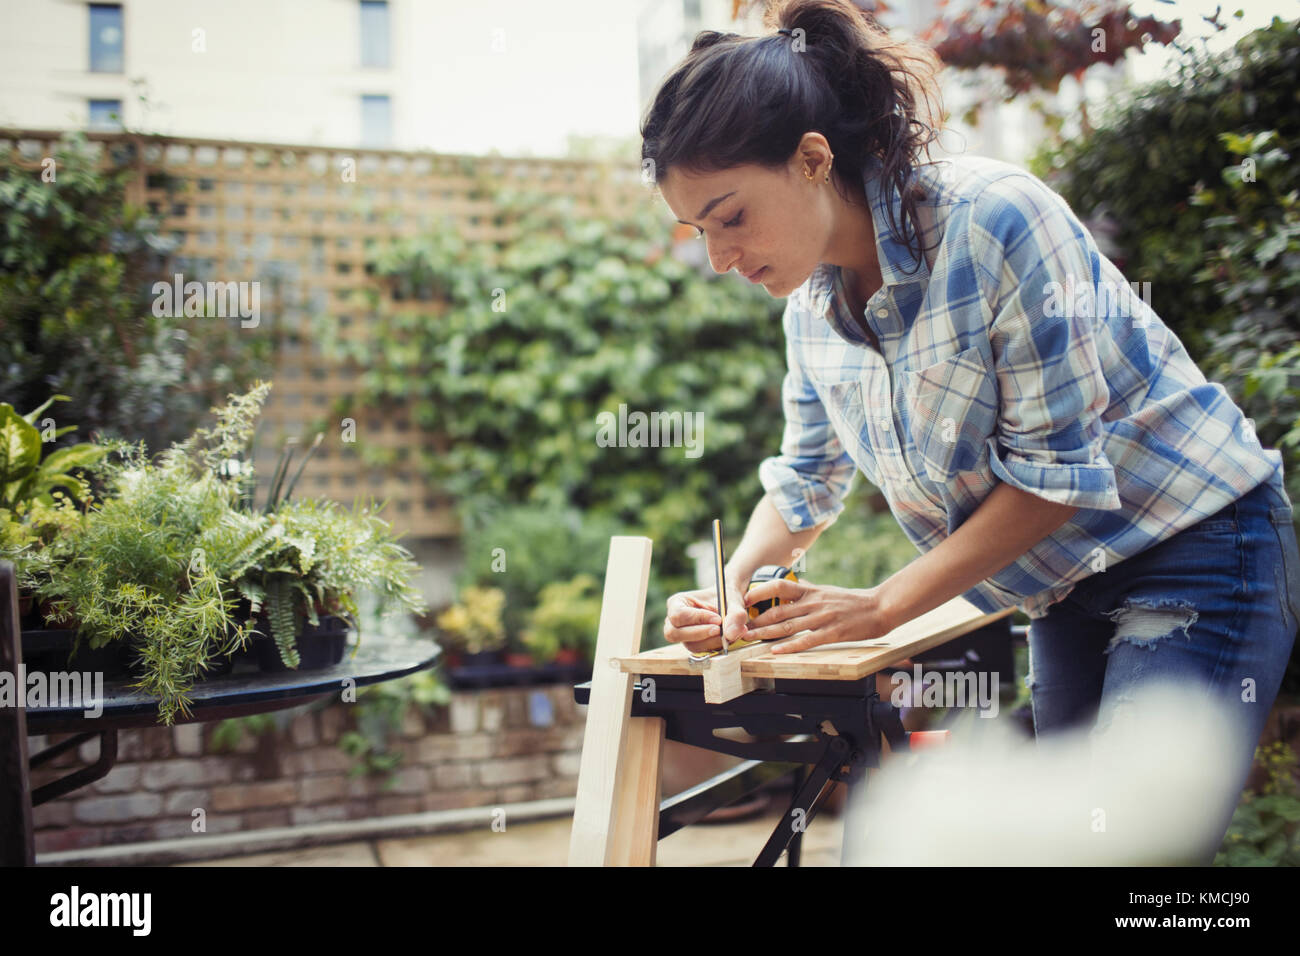 Young woman measuring and marking wood on patio Stock Photo